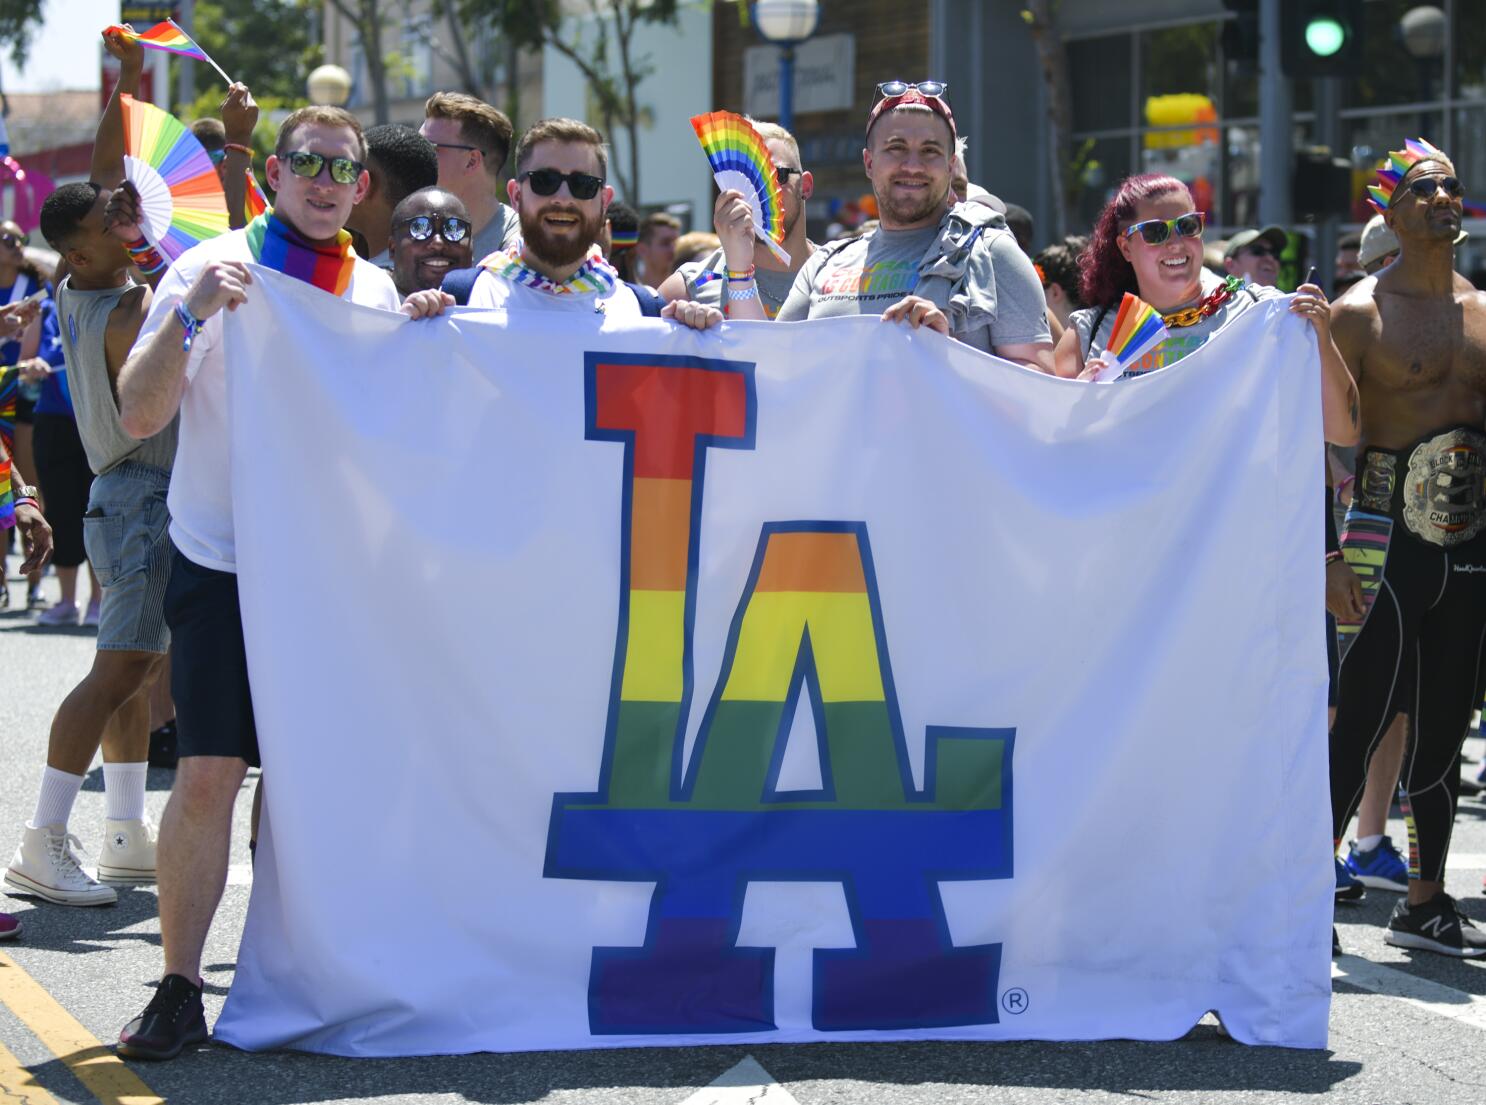 Sisters' respond to Dodgers' Pride Night removal controversy - Los